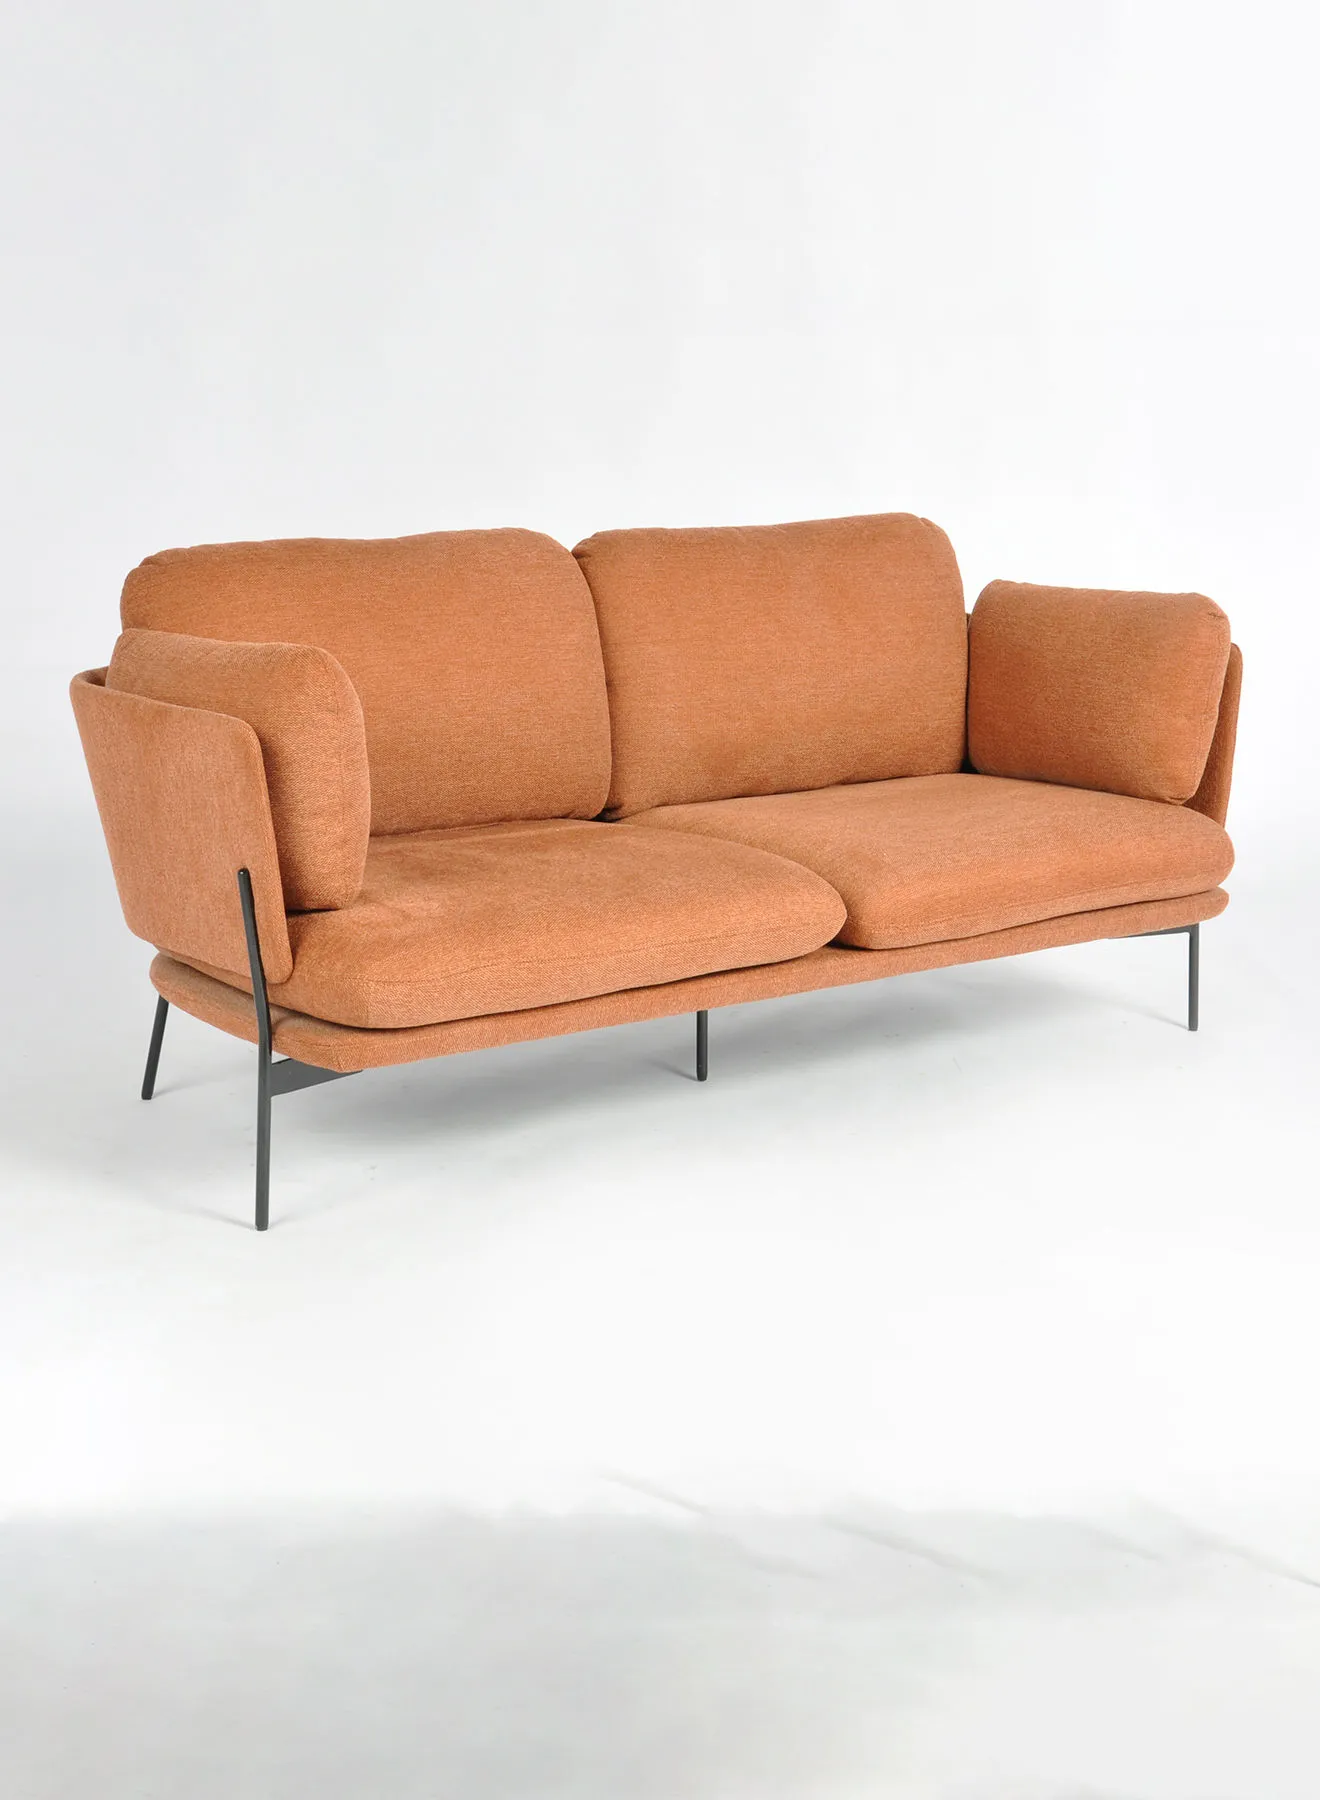 Switch Sofa - Upholstered Fabric Orange Wood Couch - 168 X 78 X 78 - 2 Seater Sofa Relaxing Sofa